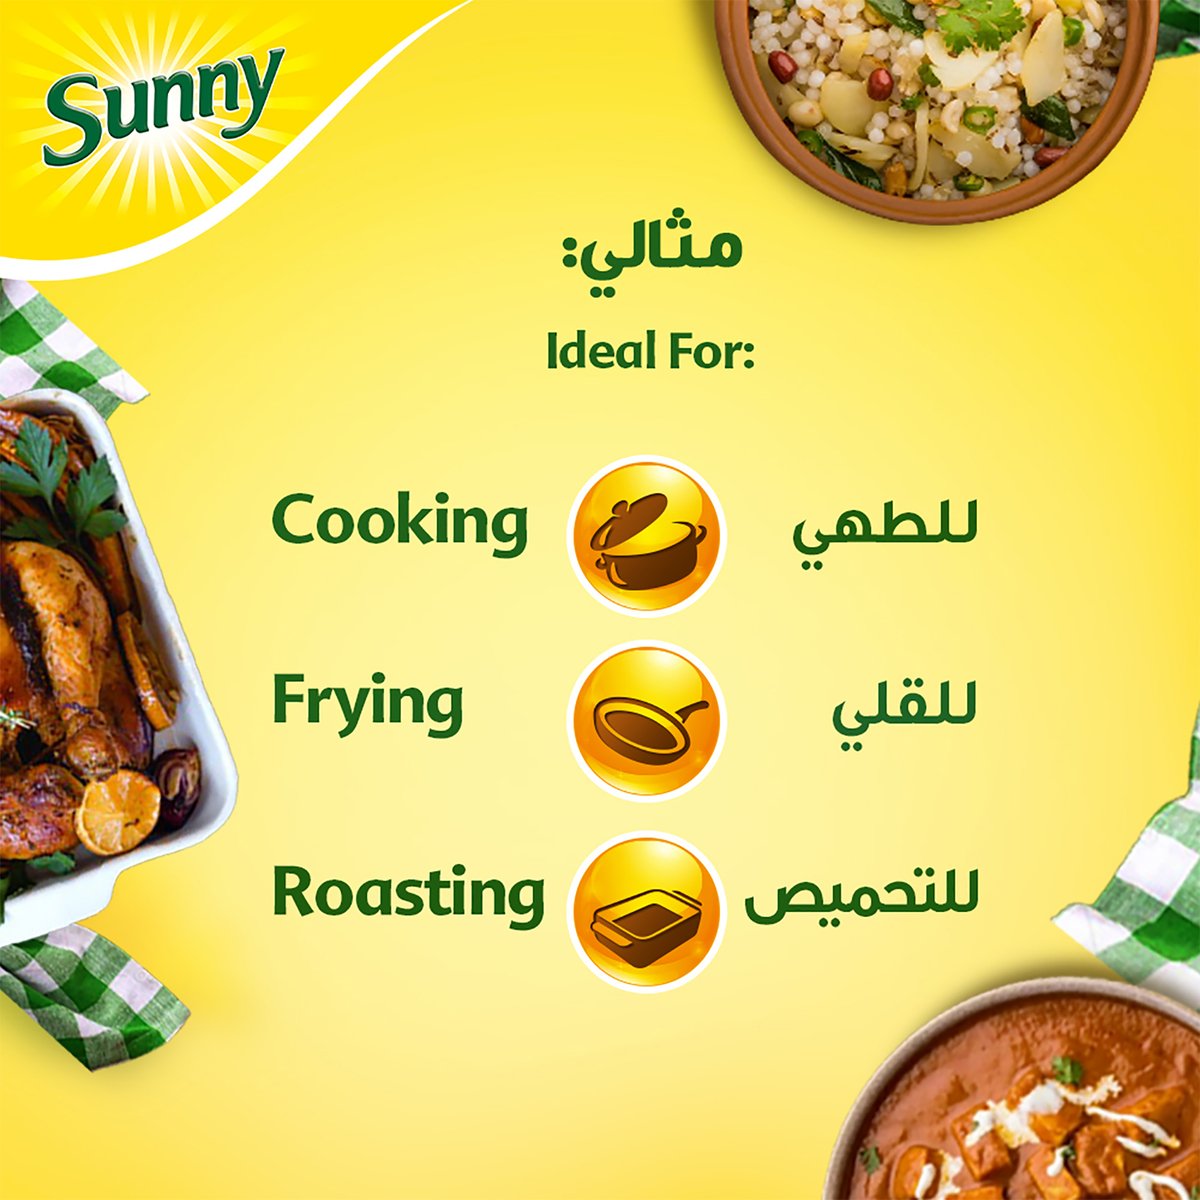 Sunny Active Multipurpose Cooking Oil 750 ml